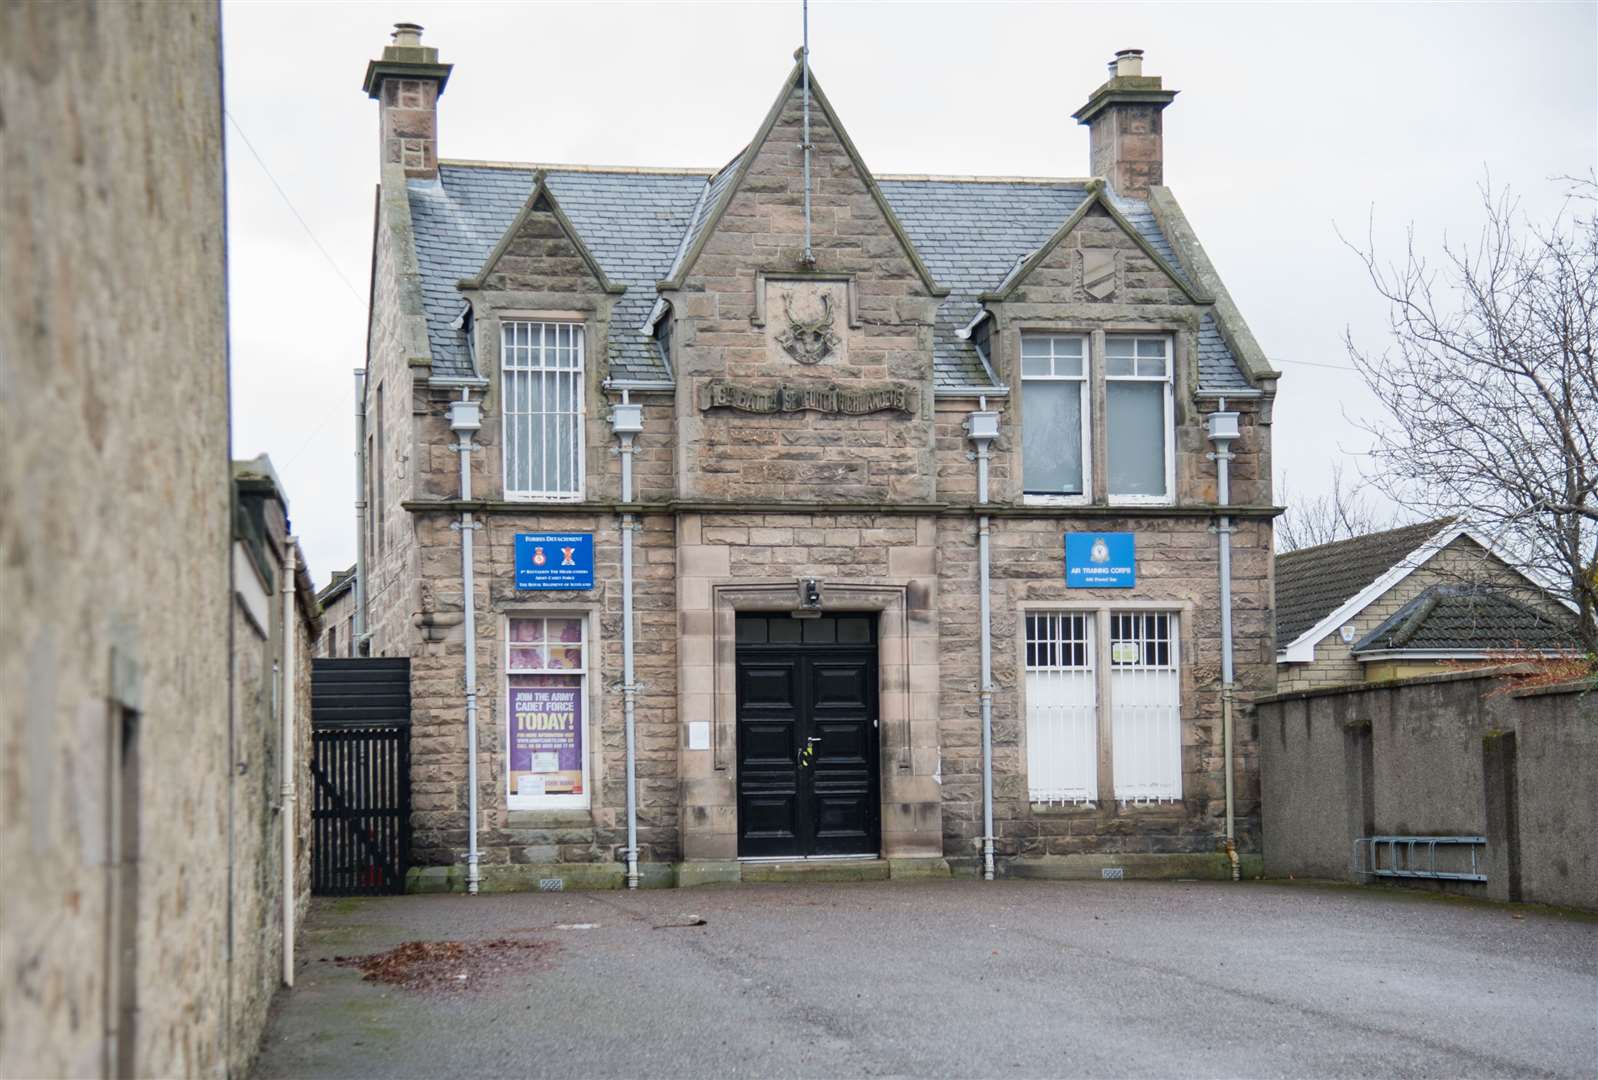 The Forres Cadet headquarters and drill hall on Victoria Road.